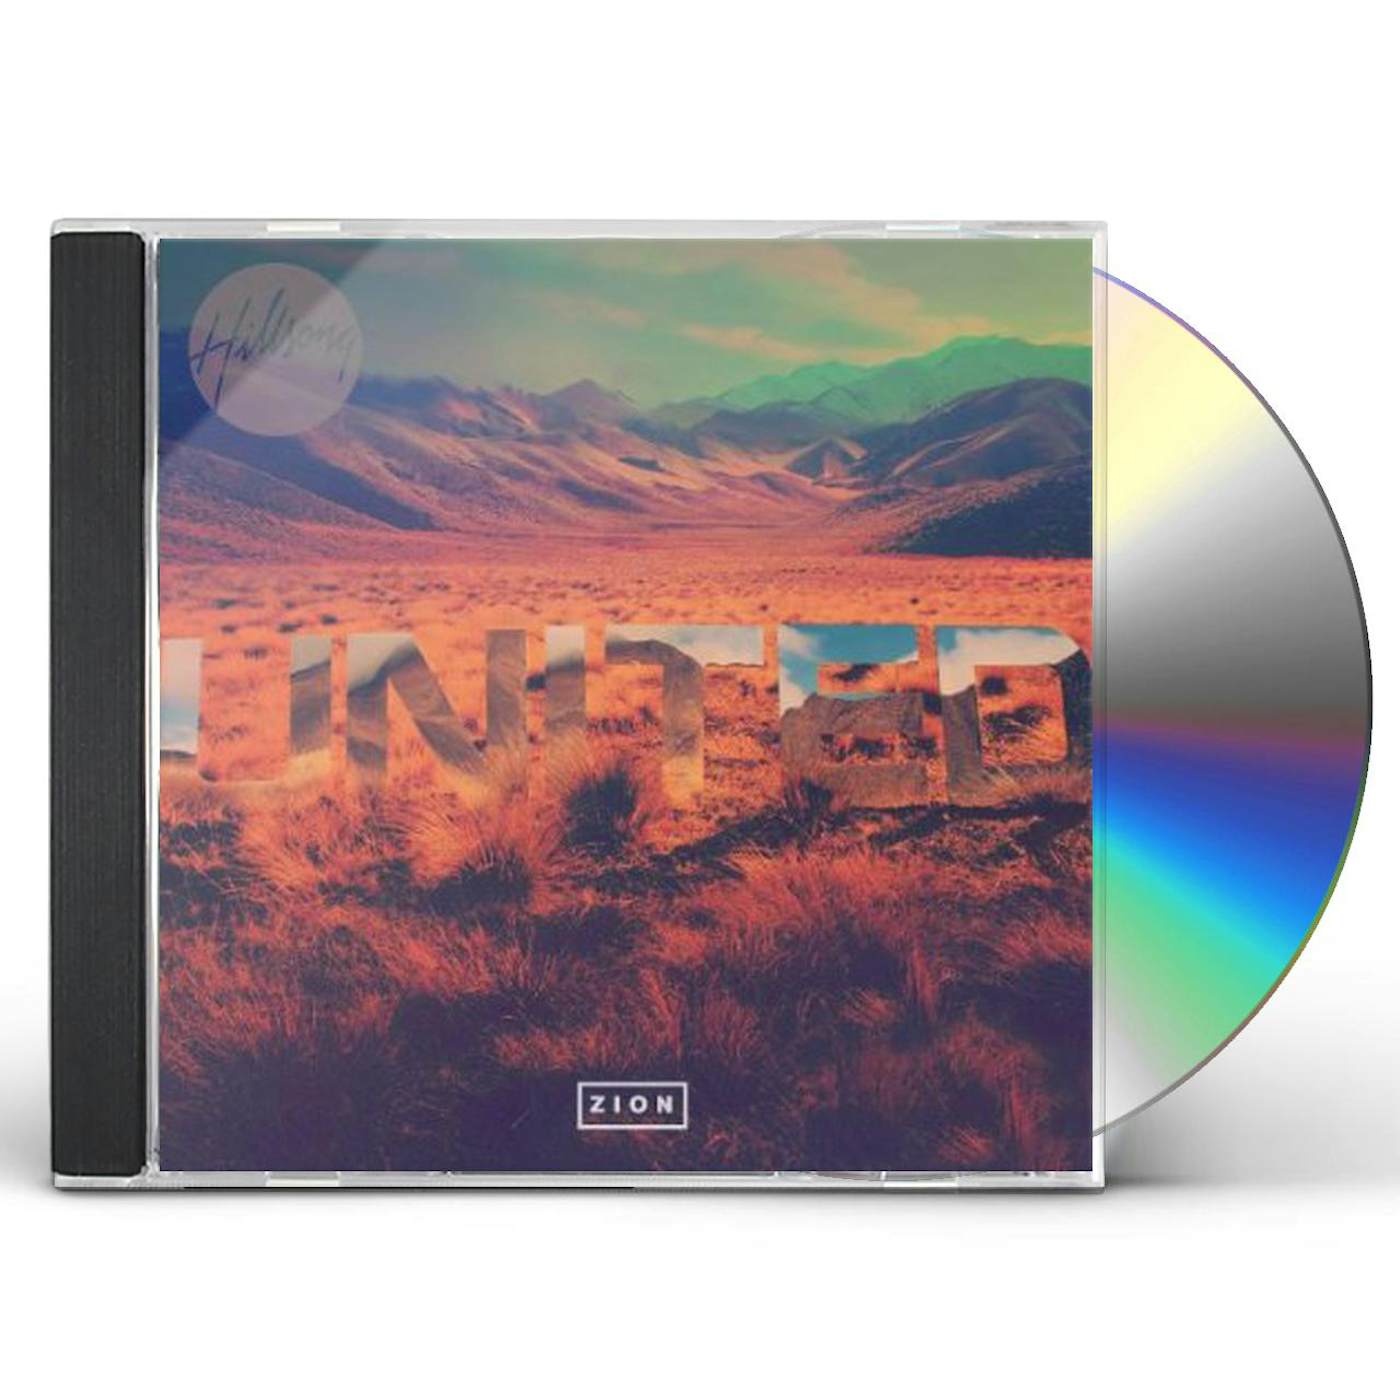 Hillsong UNITED ZION CD